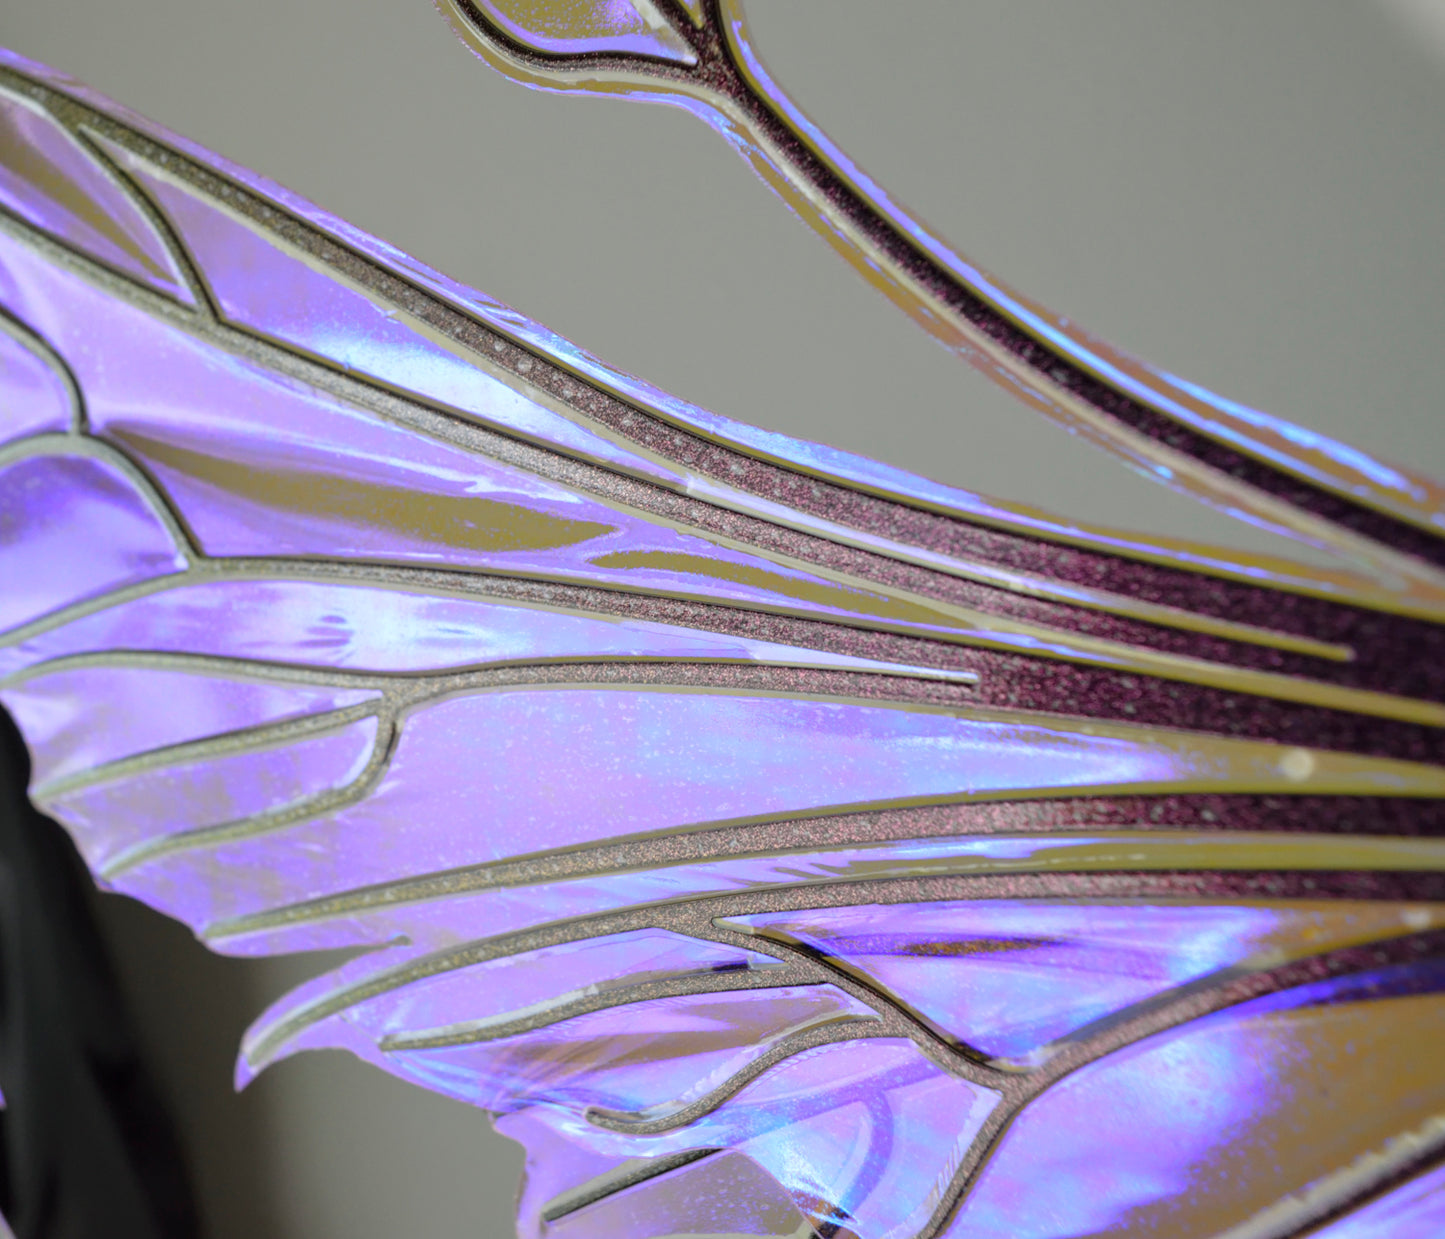 Elvina Iridescent Convertible Fairy Wings in Lilac with Chameleon Cherry Violet Glitter veins